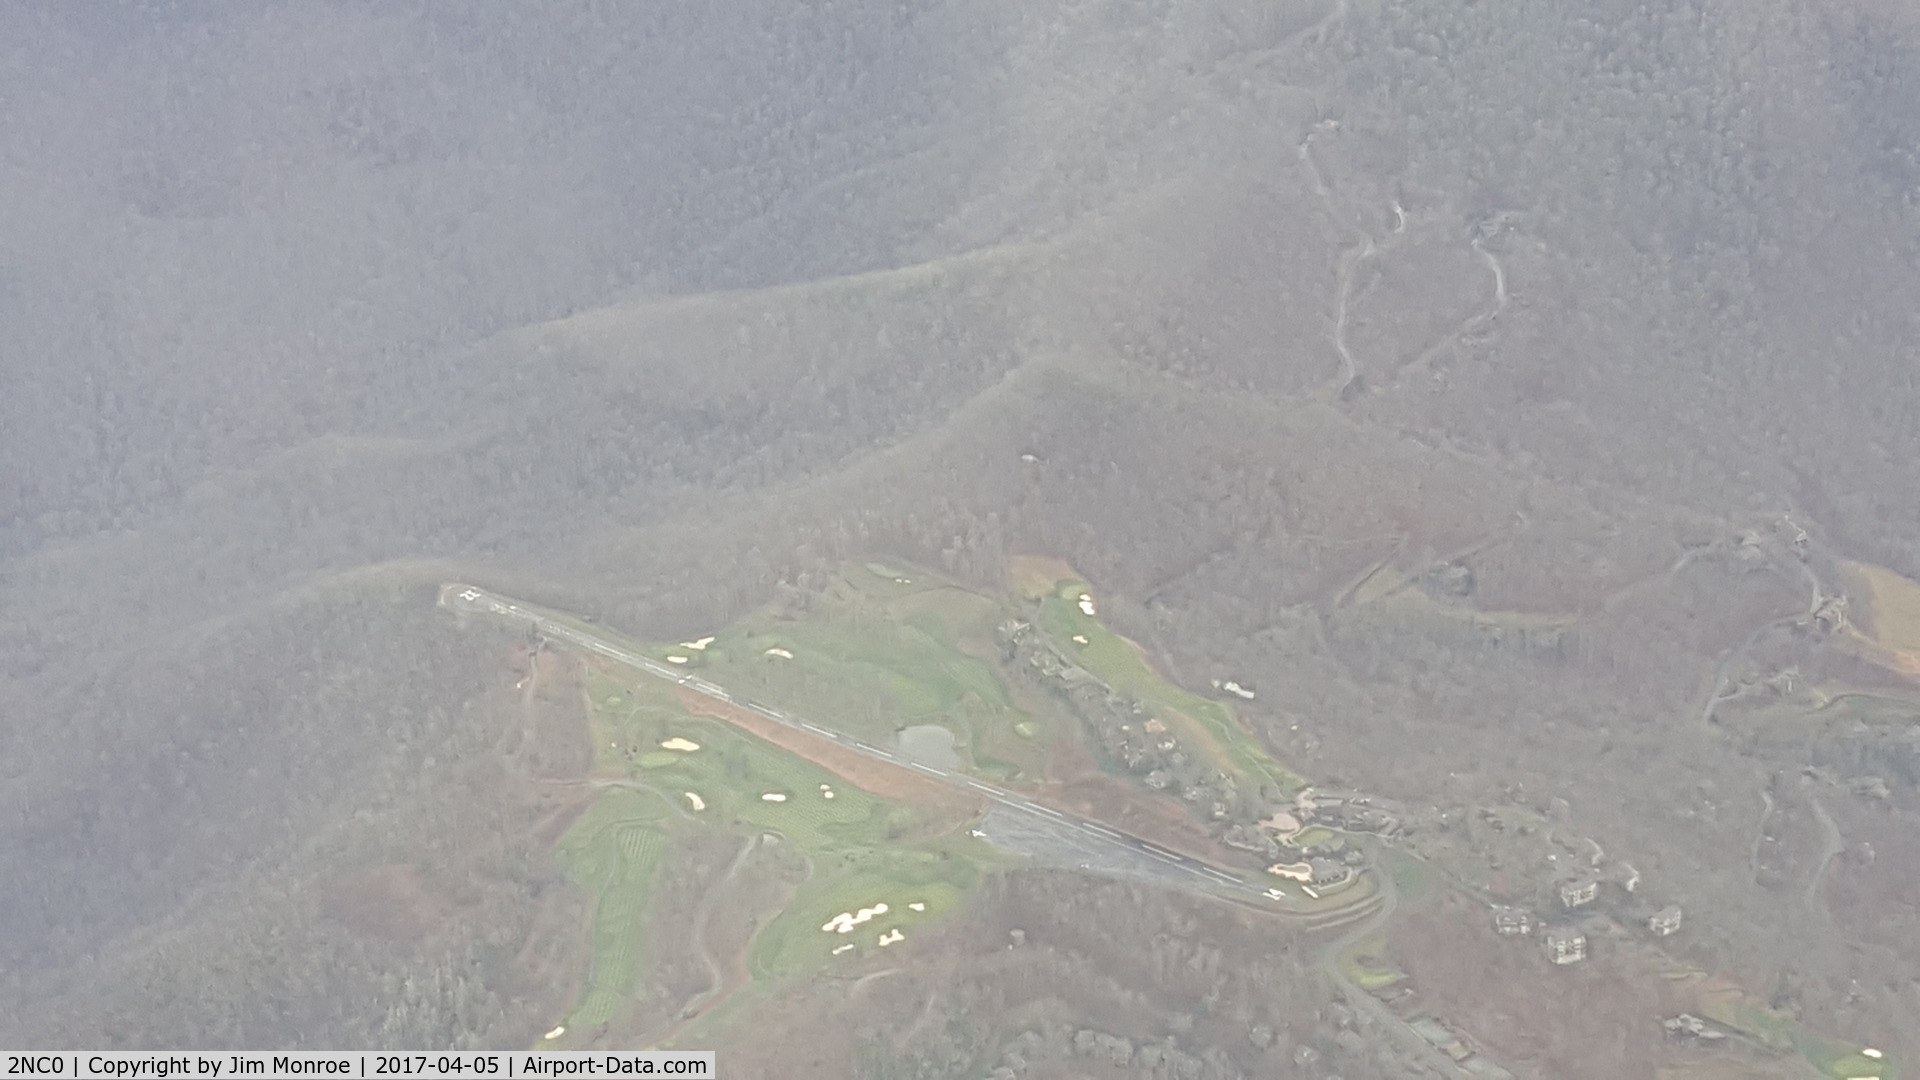 Mountain Air Airport (2NC0) - Taken from 10,000 MSL - Mountainaire Airport - North of Asheville NC